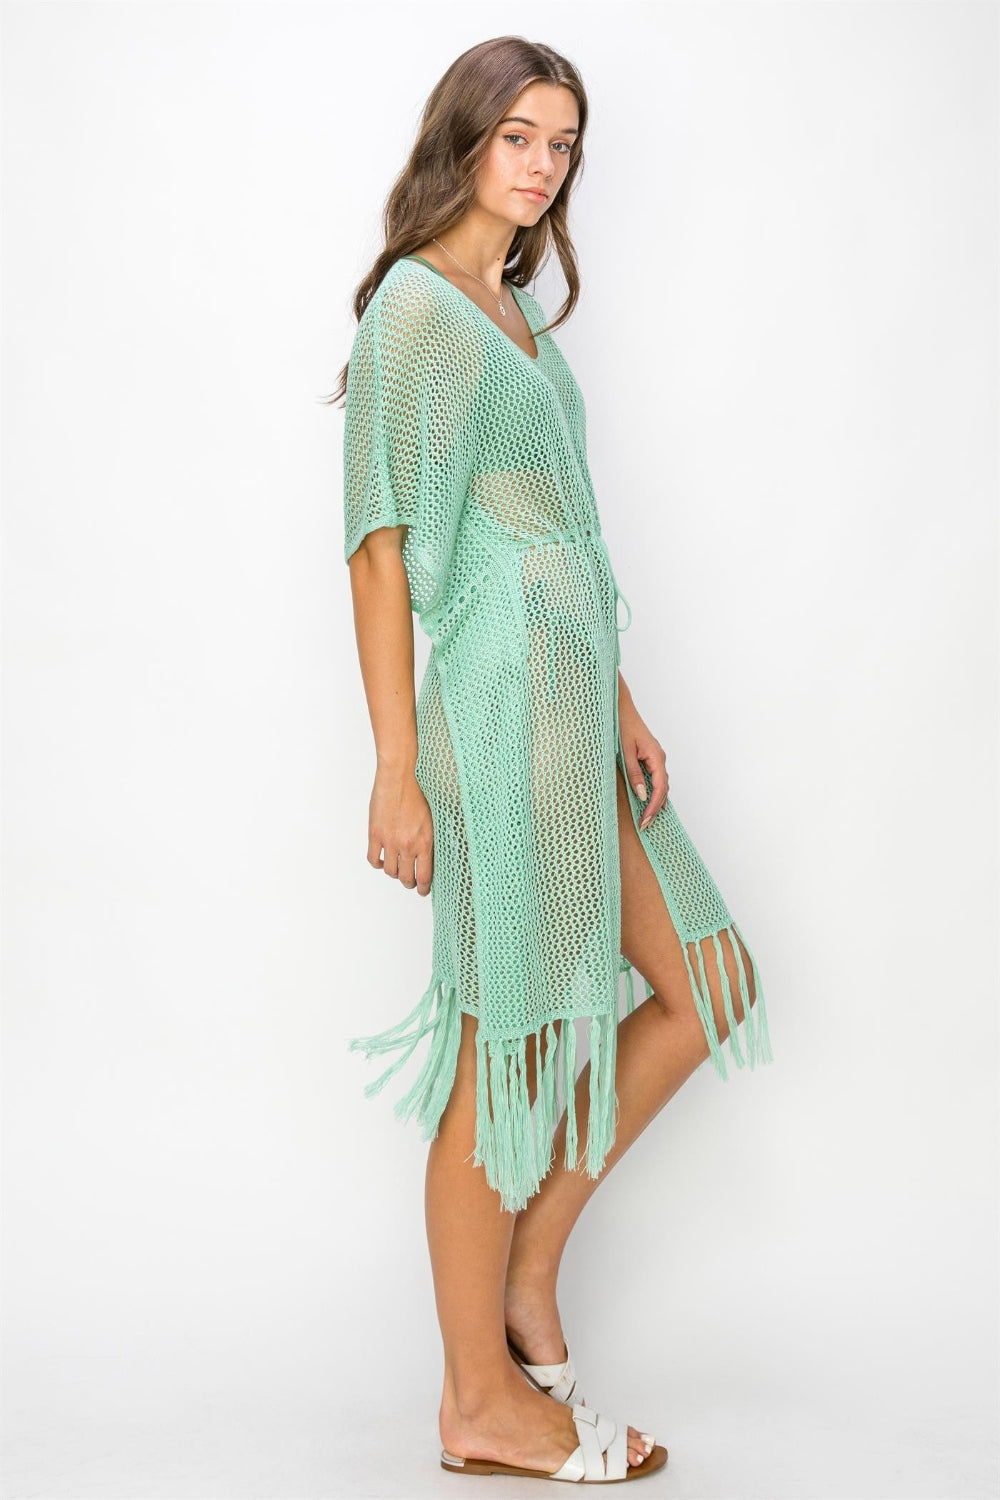 Drawstring Waist Fringed Hem Swim Cover Up in Mint Southern Soul Collectives